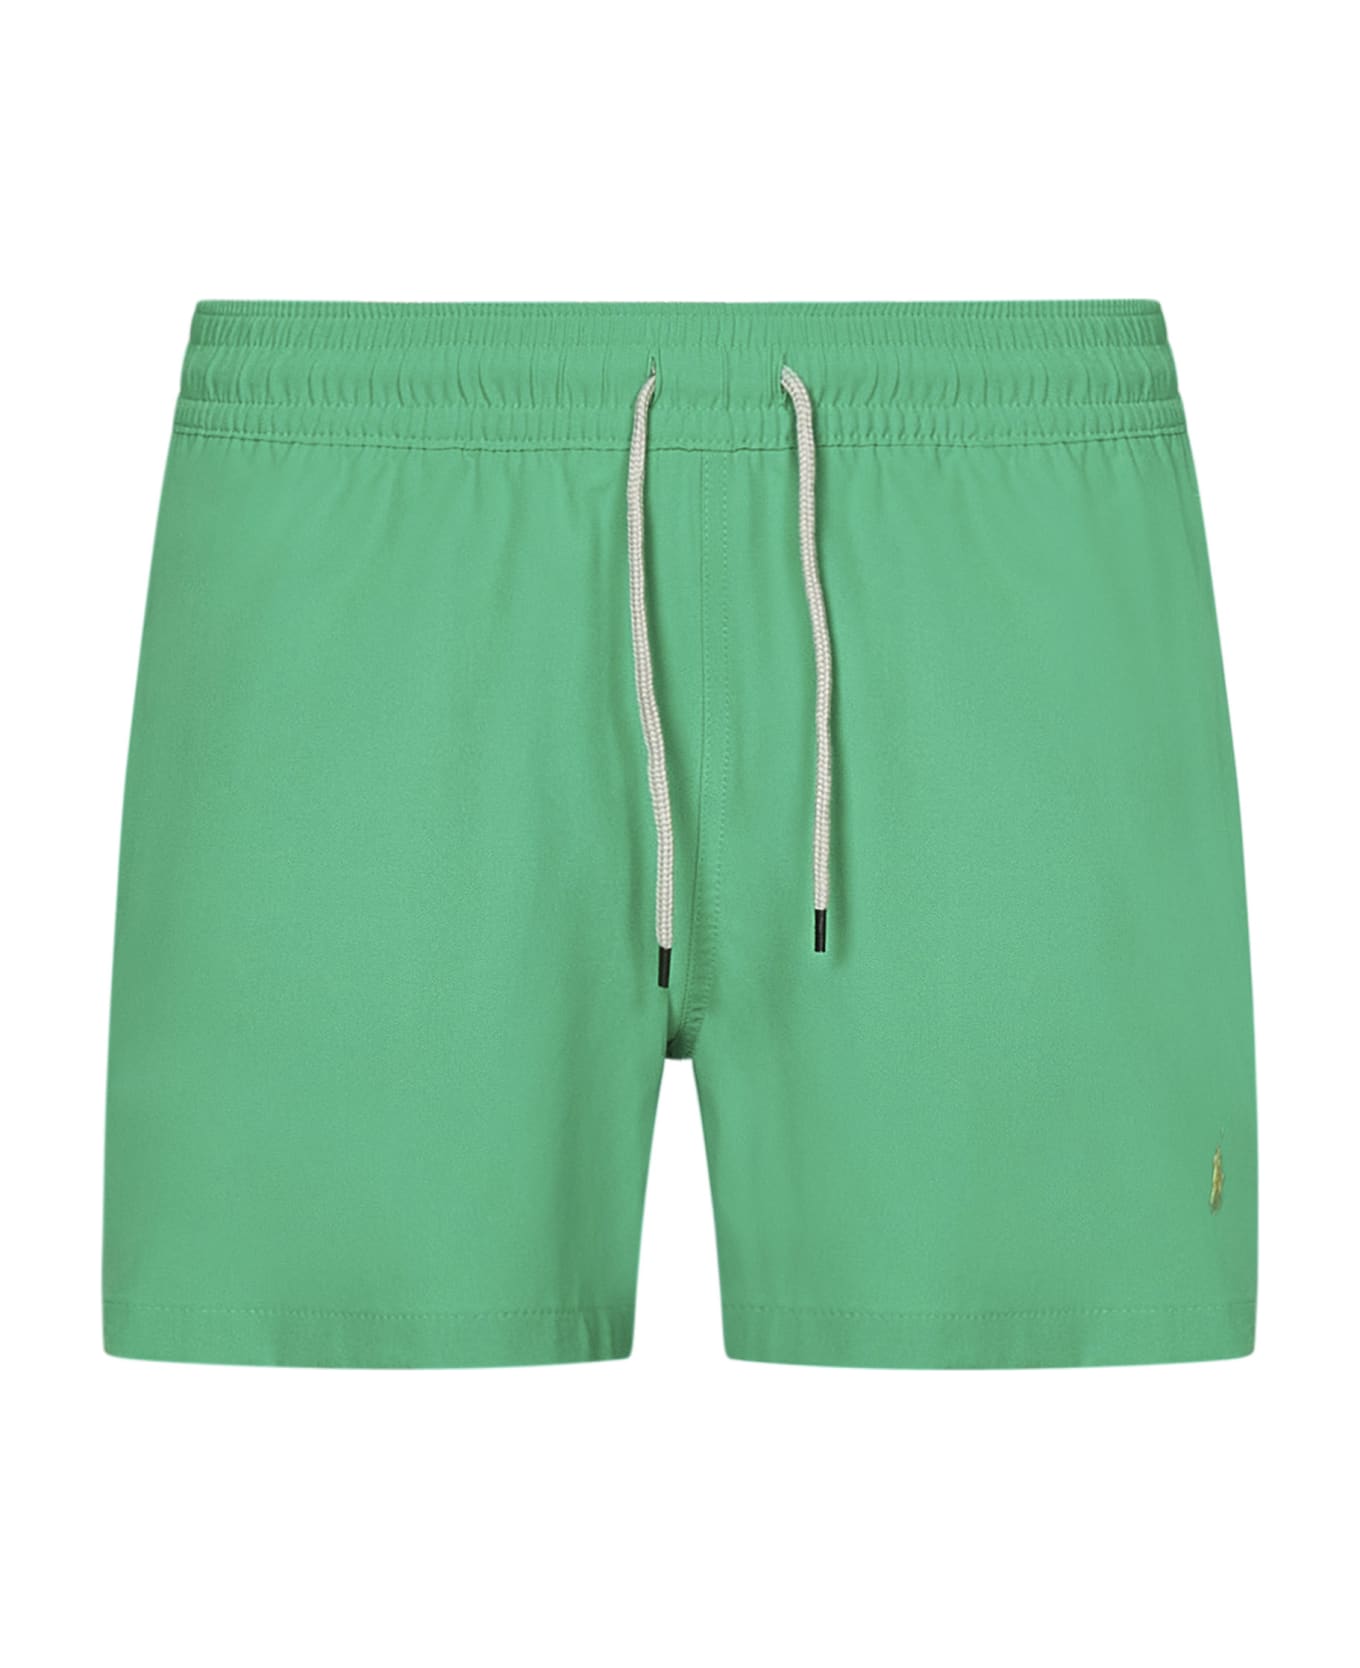 Polo Ralph Lauren Green Swim Shorts With Embroidered Pony - Green